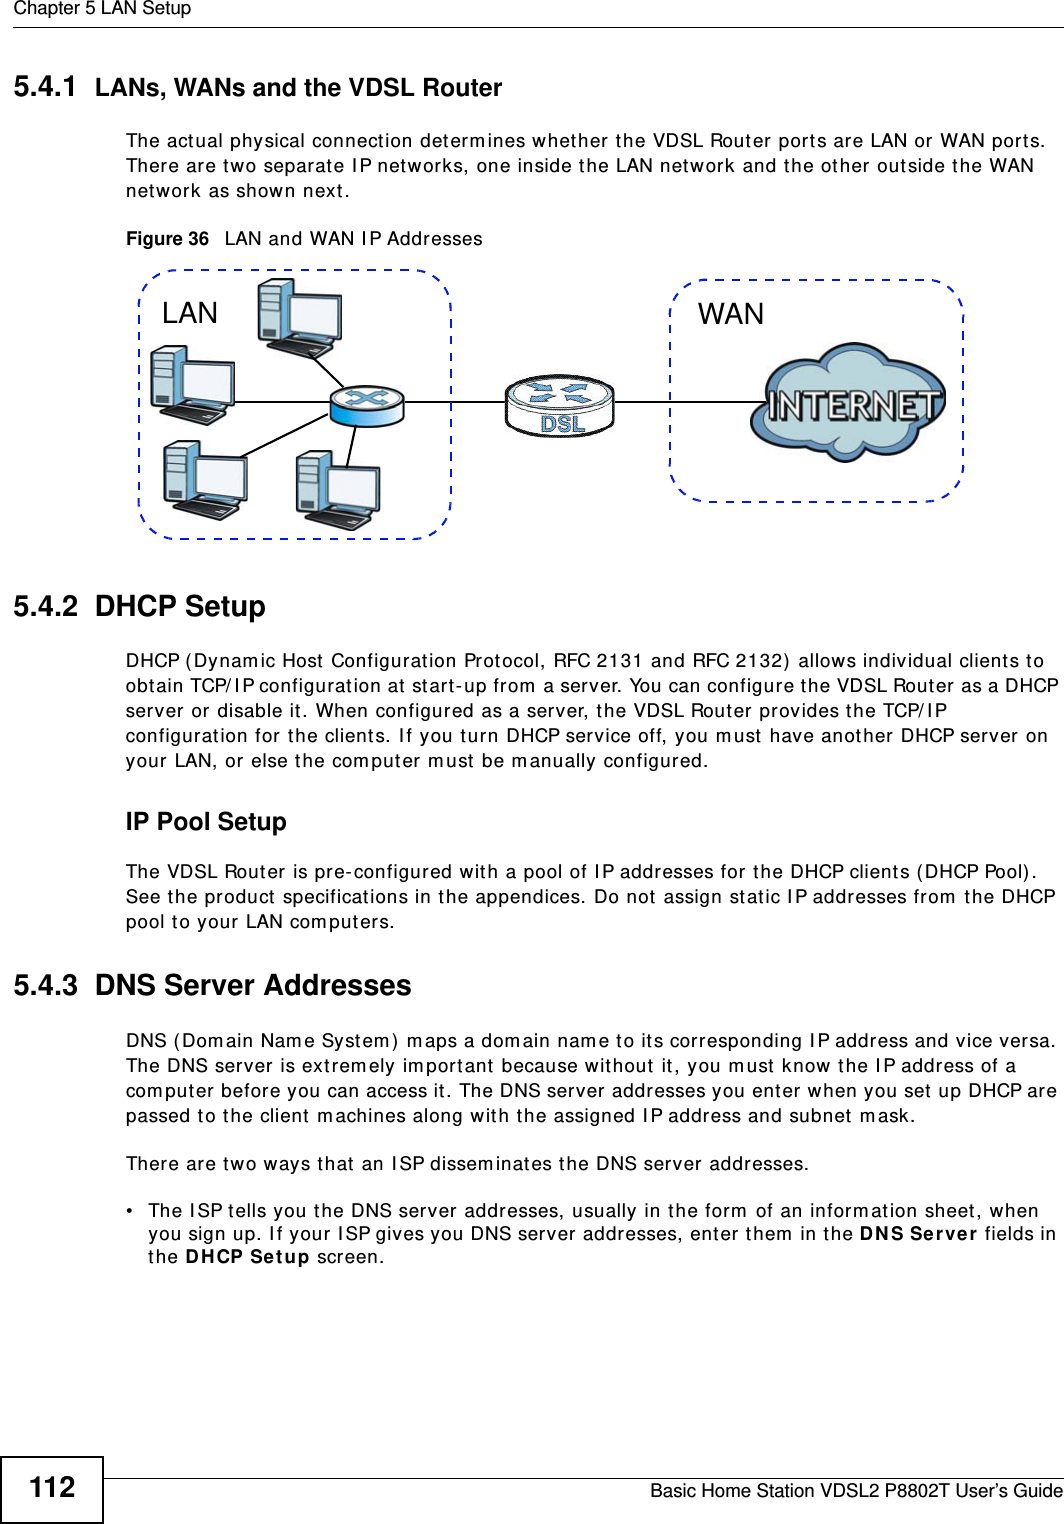 Chapter 5 LAN SetupBasic Home Station VDSL2 P8802T User’s Guide1125.4.1  LANs, WANs and the VDSL RouterThe act ual physical connect ion determ ines whether the VDSL Router port s are LAN or WAN ports. There are t wo separate I P networks, one inside the LAN net work and the ot her outside the WAN net work as shown next.Figure 36   LAN and WAN I P Addresses5.4.2  DHCP SetupDHCP (Dynam ic Host  Configuration Protocol, RFC 2131 and RFC 2132)  allows individual clients to obt ain TCP/ I P configuration at  start -up from  a server. You can configure t he VDSL Router as a DHCP server or disable it . When configured as a server, the VDSL Router pr ovides the TCP/ I P configuration for the client s. I f you t urn DHCP service off, you m ust  have another  DHCP server on your LAN, or  else t he computer m ust  be m anually configured. IP Pool SetupThe VDSL Rout er is pre- configured with a pool of I P addresses for t he DHCP clients ( DHCP Pool) . See t he product  specificat ions in the appendices. Do not assign st at ic I P addresses from  t he DHCP pool to your LAN com puters.5.4.3  DNS Server Addresses DNS ( Dom ain Nam e Syst em ) m aps a dom ain nam e t o its corresponding I P address and vice versa. The DNS ser ver is extrem ely im portant because wit hout  it, you m ust know the I P address of a com puter before you can access it. The DNS server addresses you enter when you set  up DHCP are passed t o t he client  m achines along with the assigned I P address and subnet m ask.There are t wo ways t hat  an I SP dissem inat es t he DNS server addresses. • The I SP t ells you t he DNS server addresses, usually in the form  of an inform at ion sheet , when you sign up. I f your  I SP gives you DNS server  addresses, enter them  in t he DN S Ser ve r  fields in the DHCP Se t up screen.WANLAN